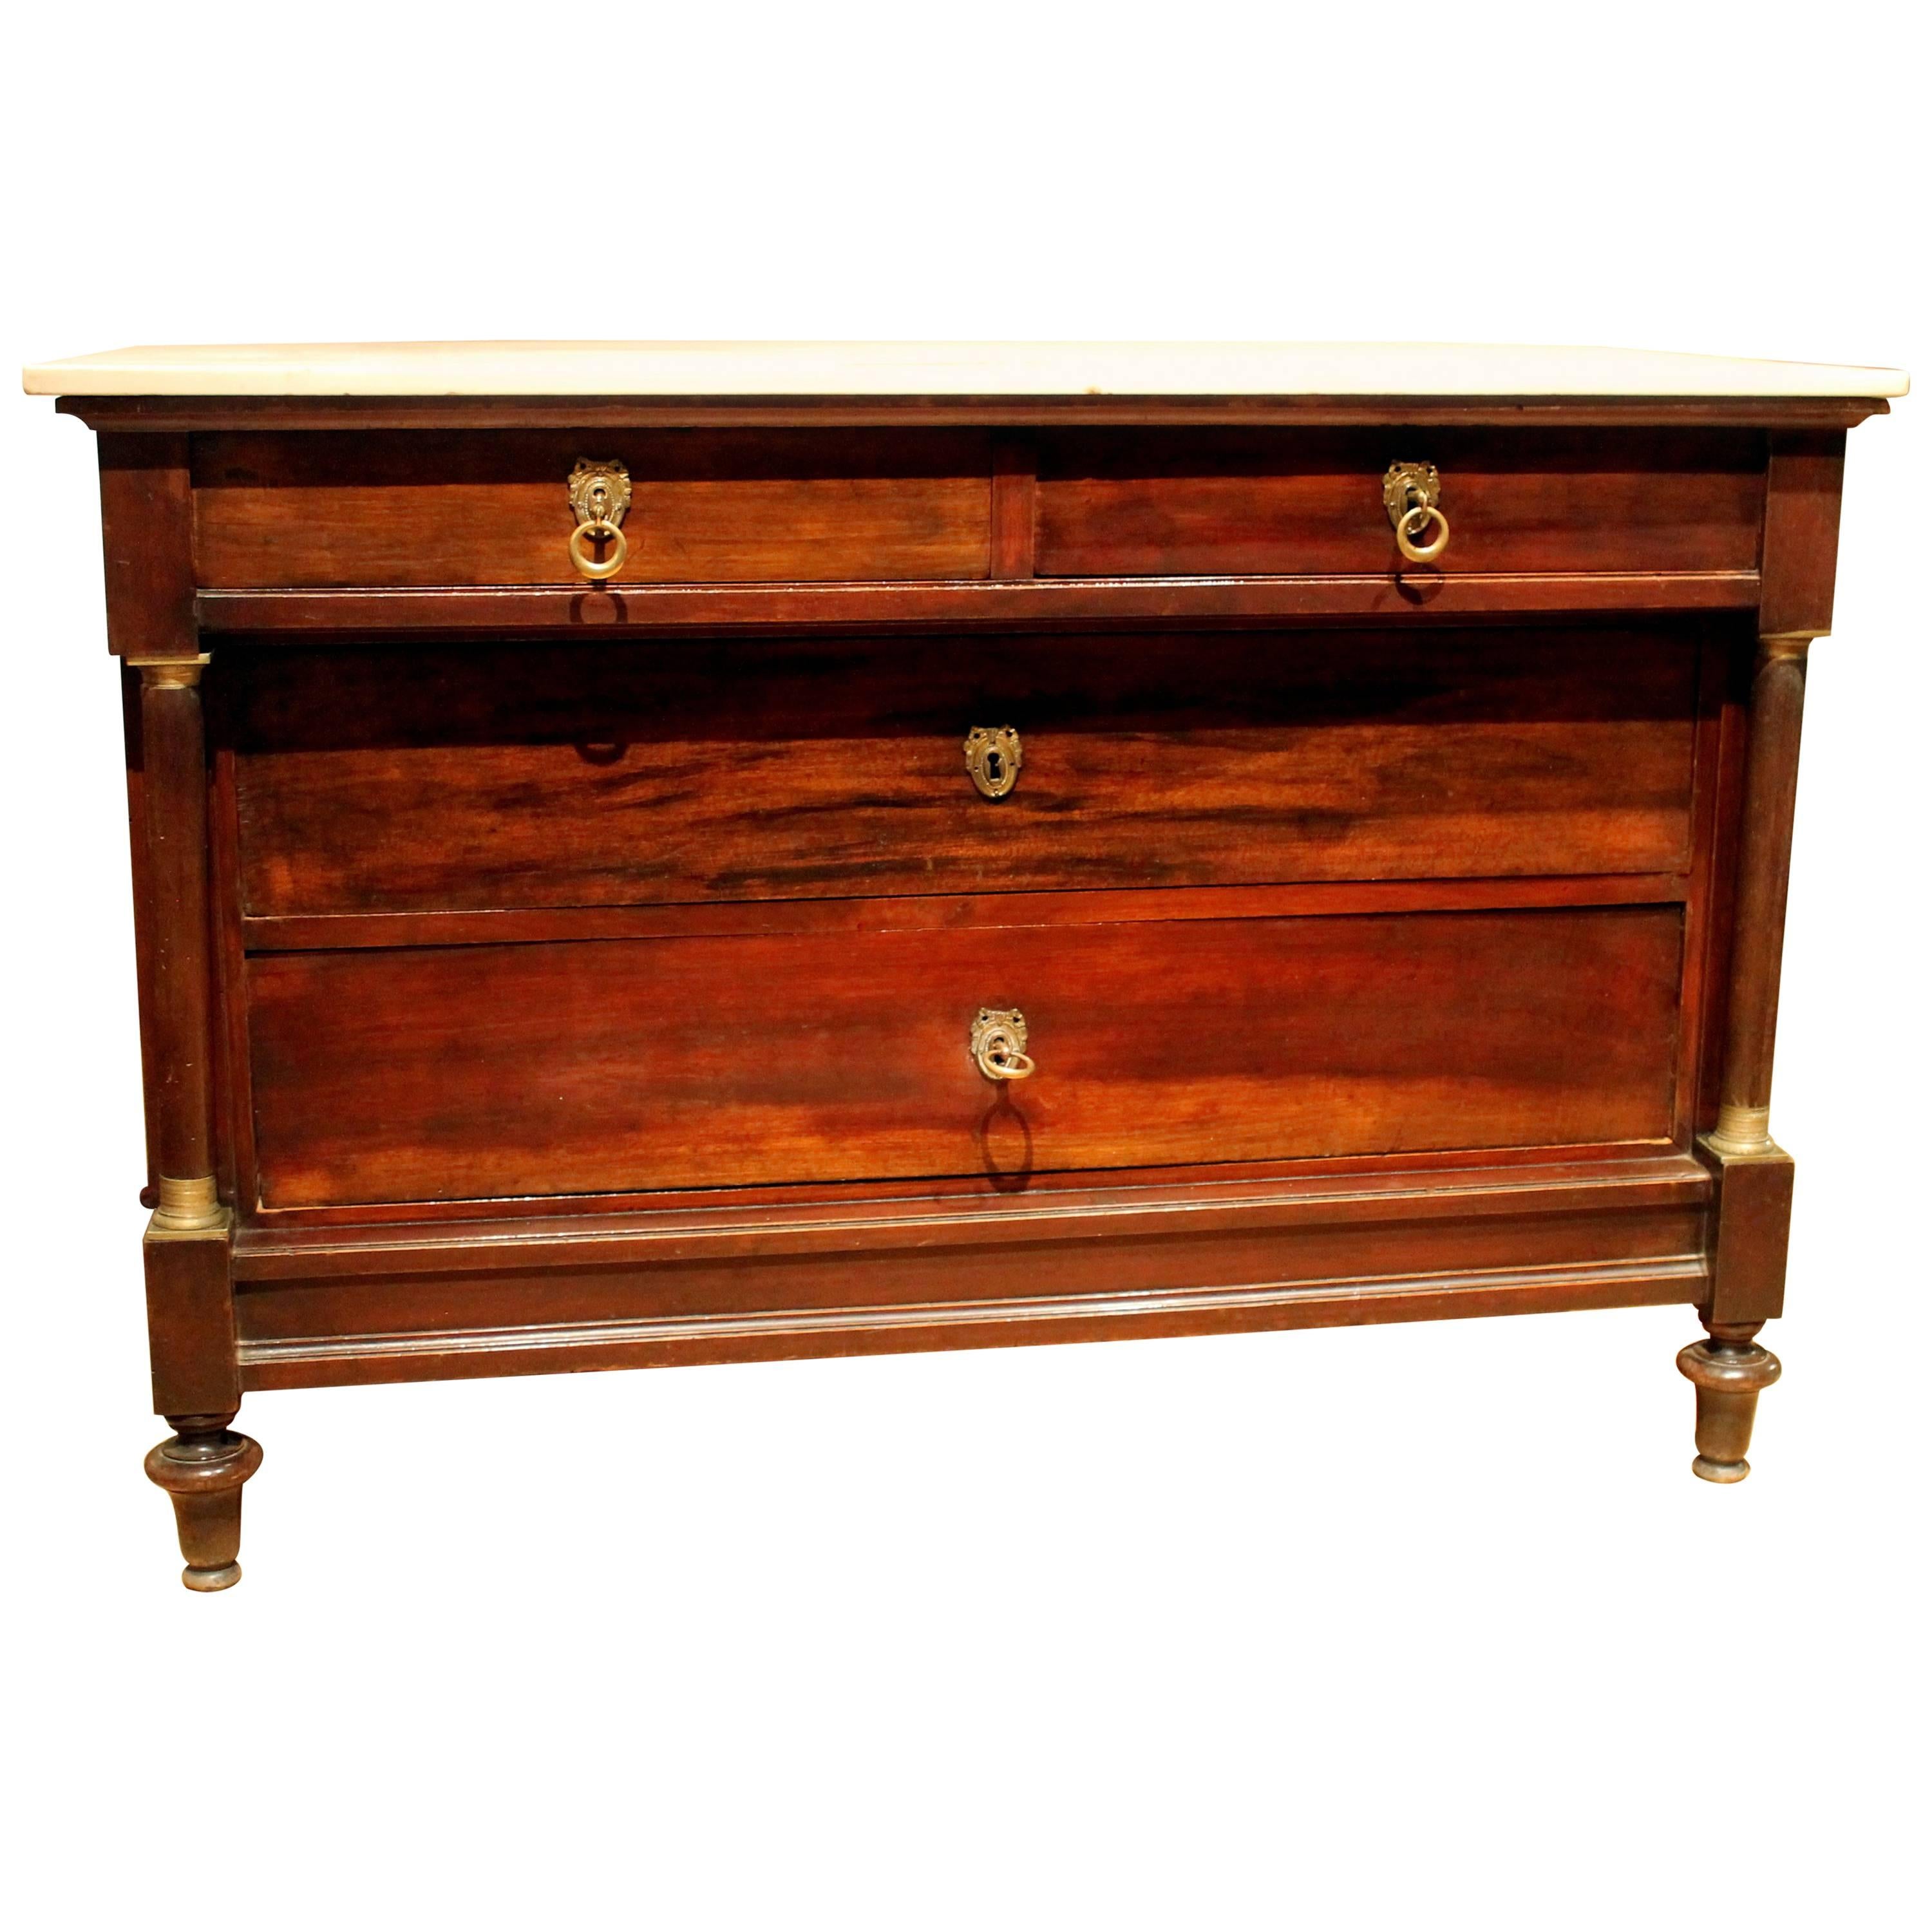 Italian Mahogany and Bronze Late Empire Chest of Drawers with White Marble Top